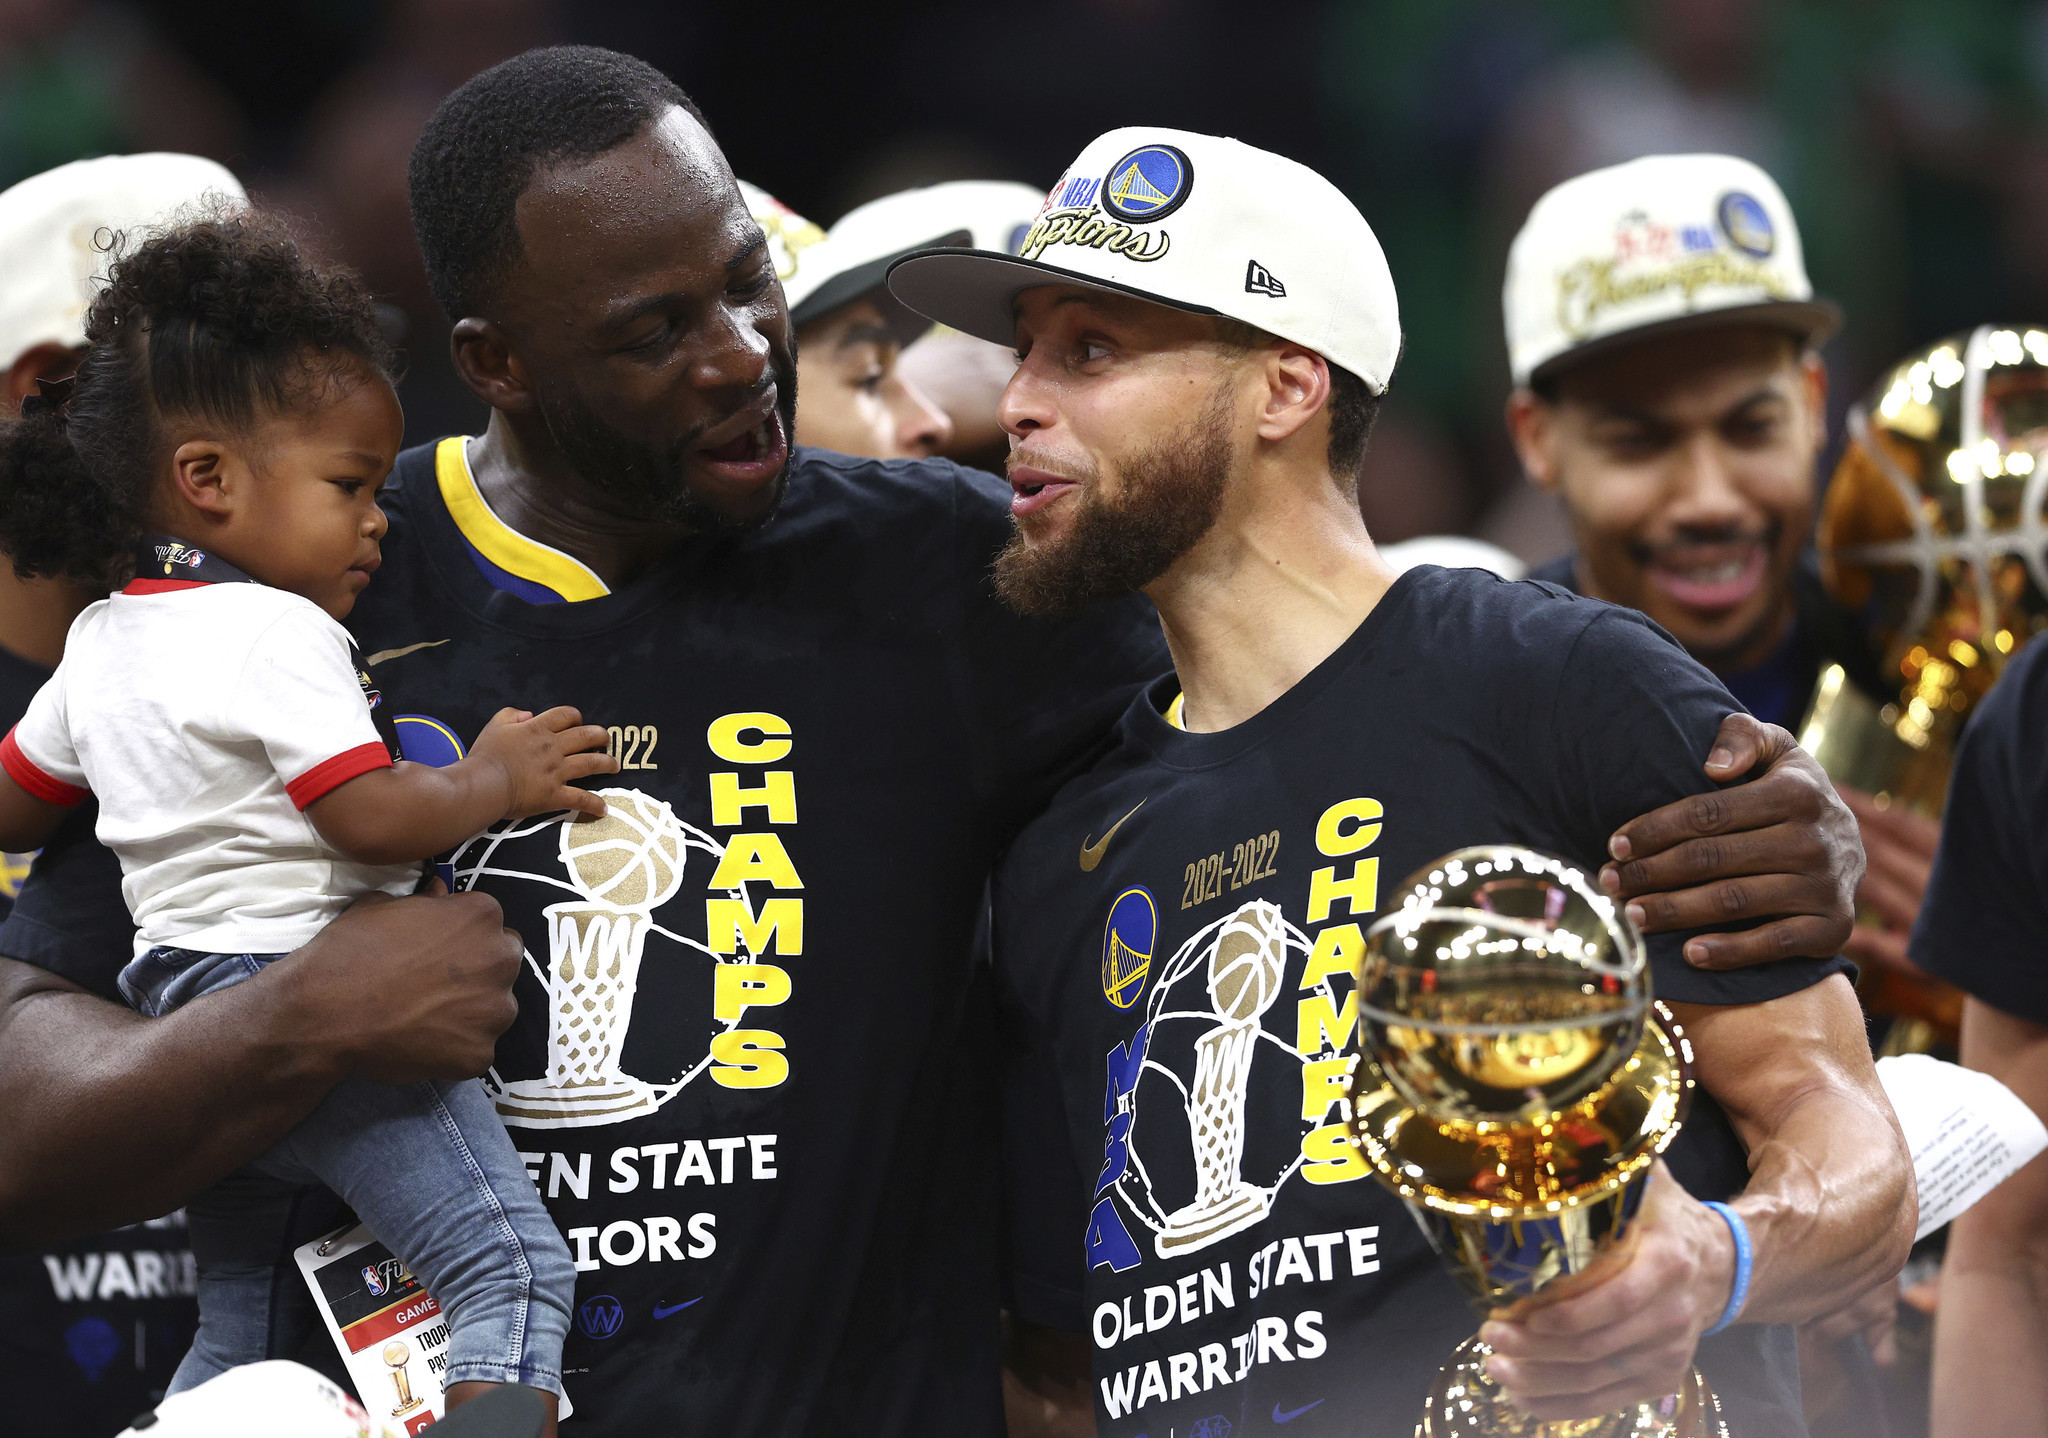 Warriors beat Celtics 103-90 to win 4th NBA title in 8 years